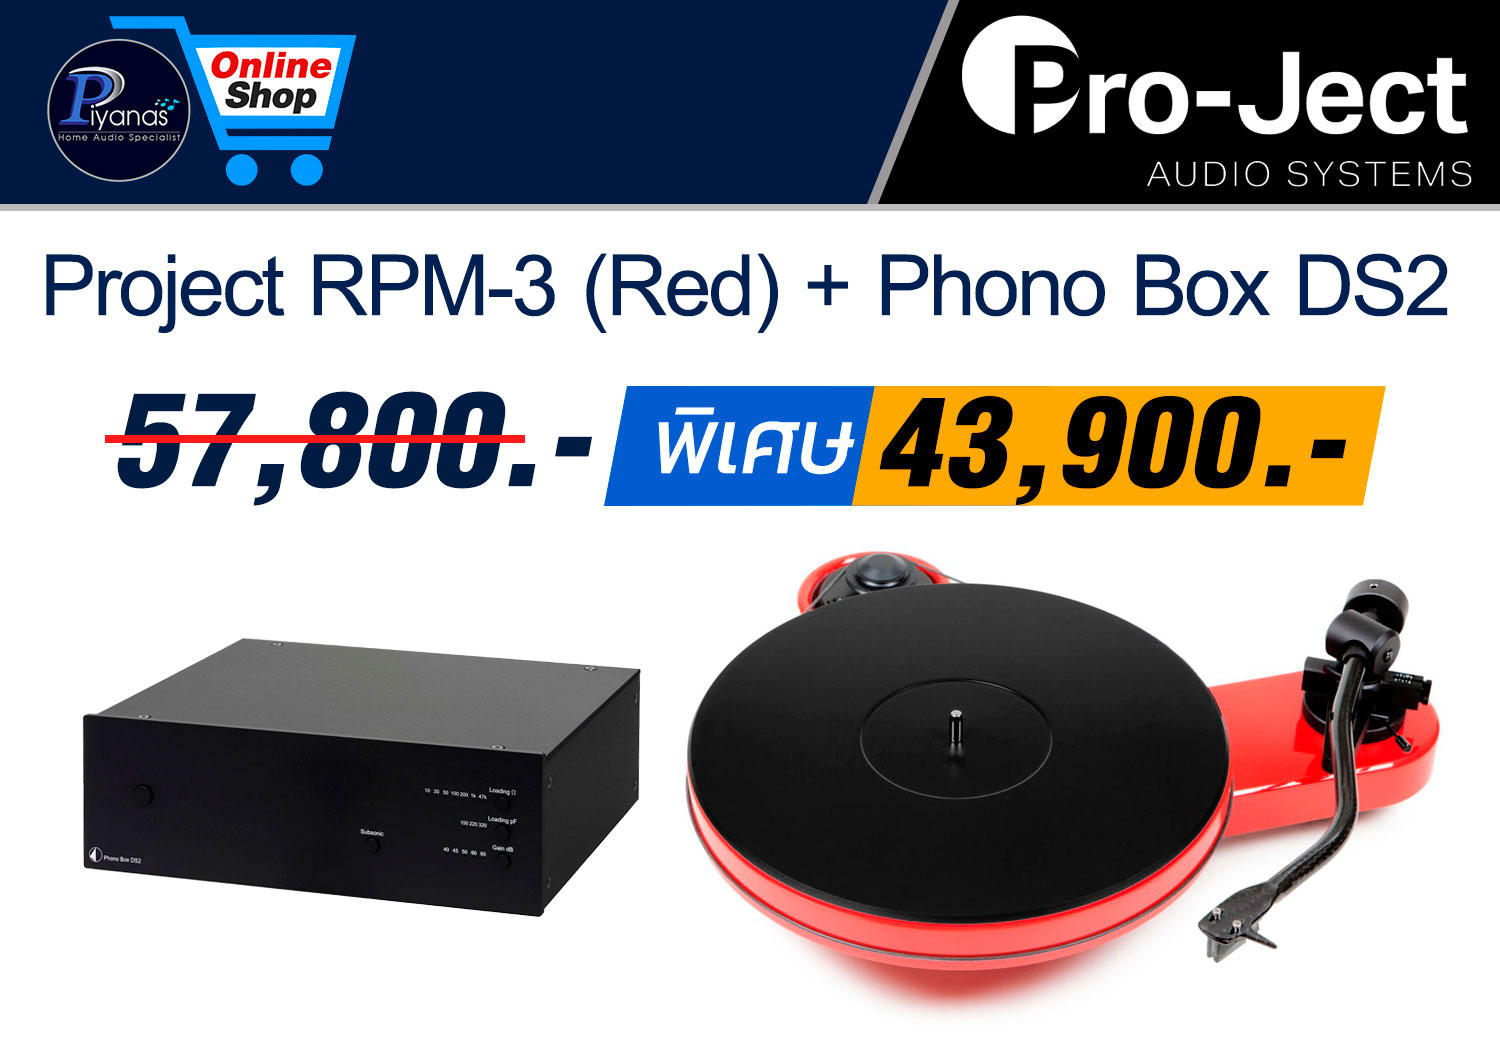 RPM-3 Carbon (Red)
+ Phono box DS2